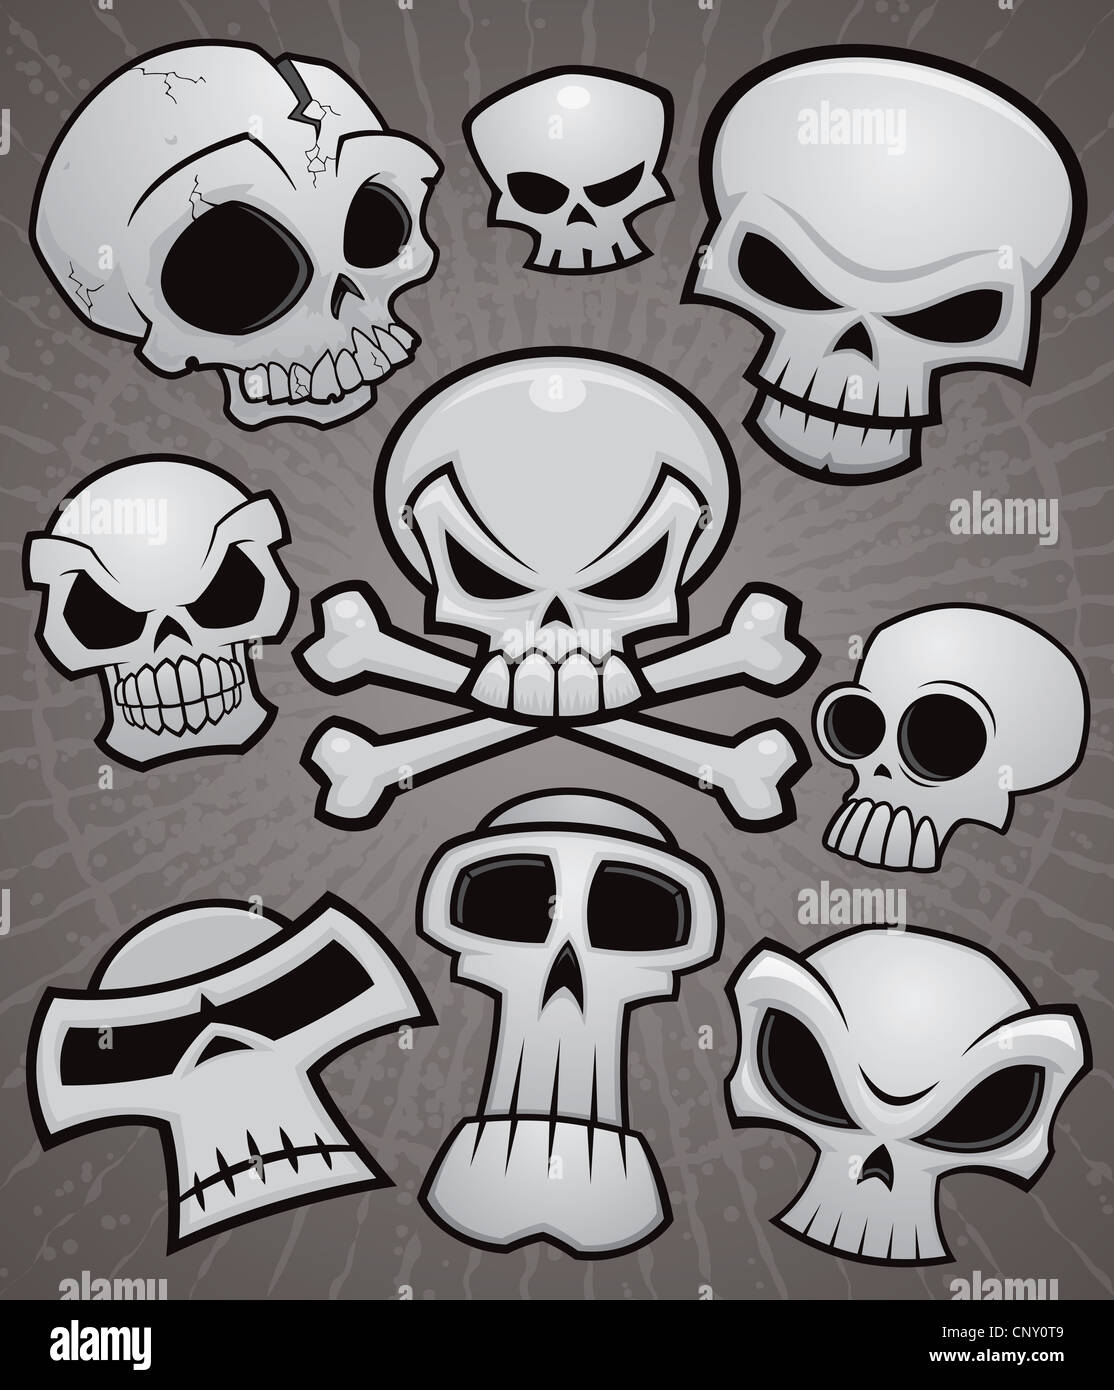 A collection of vector cartoon skulls in various styles. Stock Photo